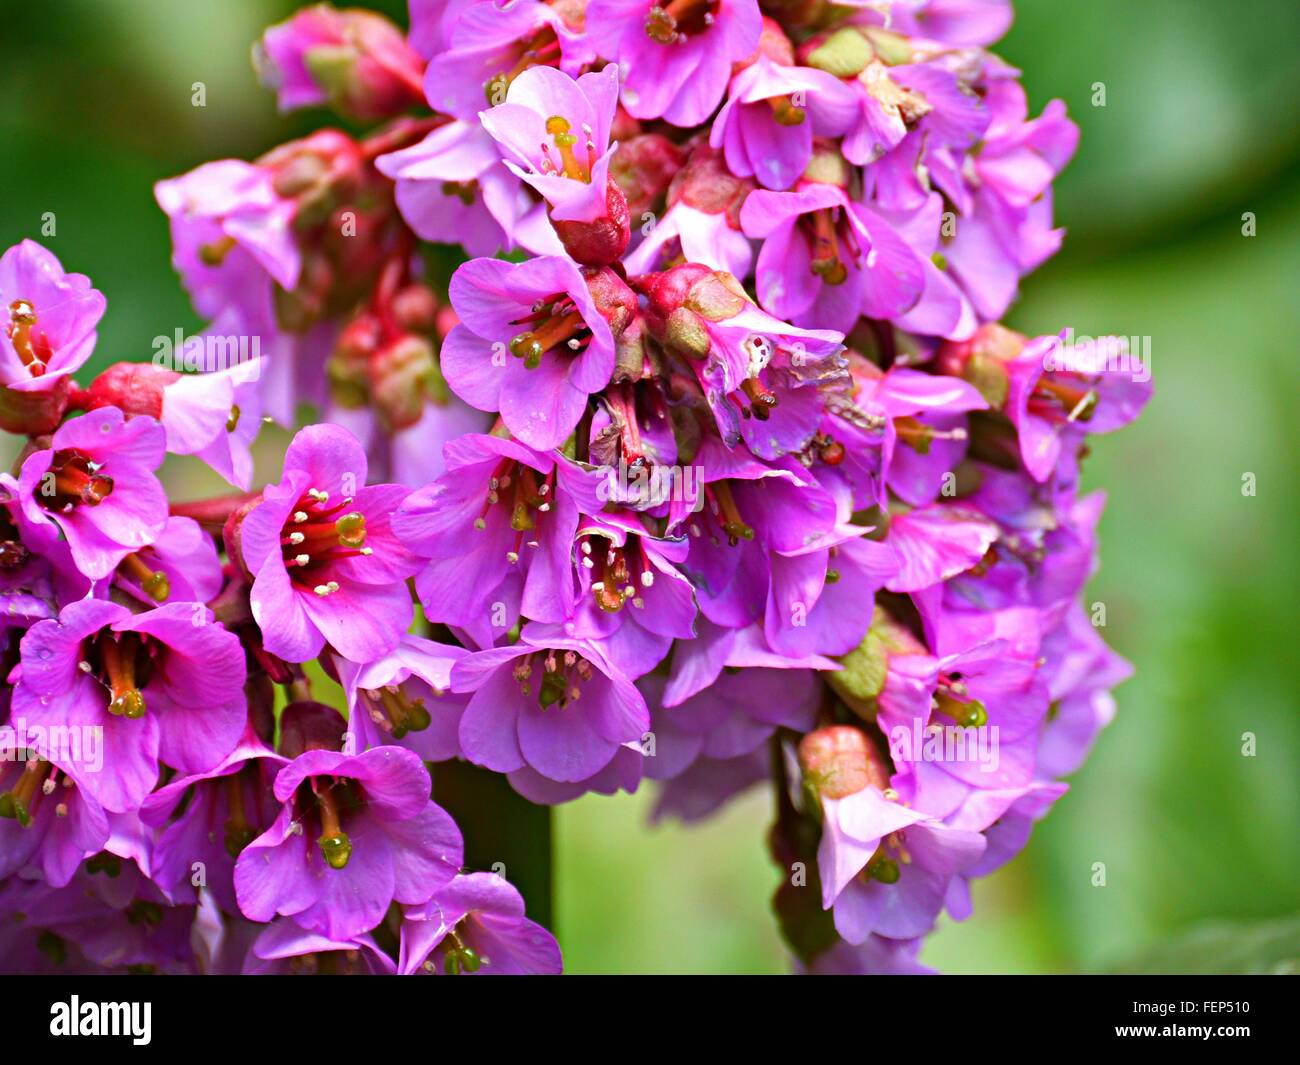 Close-Up Of Bergenia Crassifolia Flowers Blooming Outdoors Stock Photo